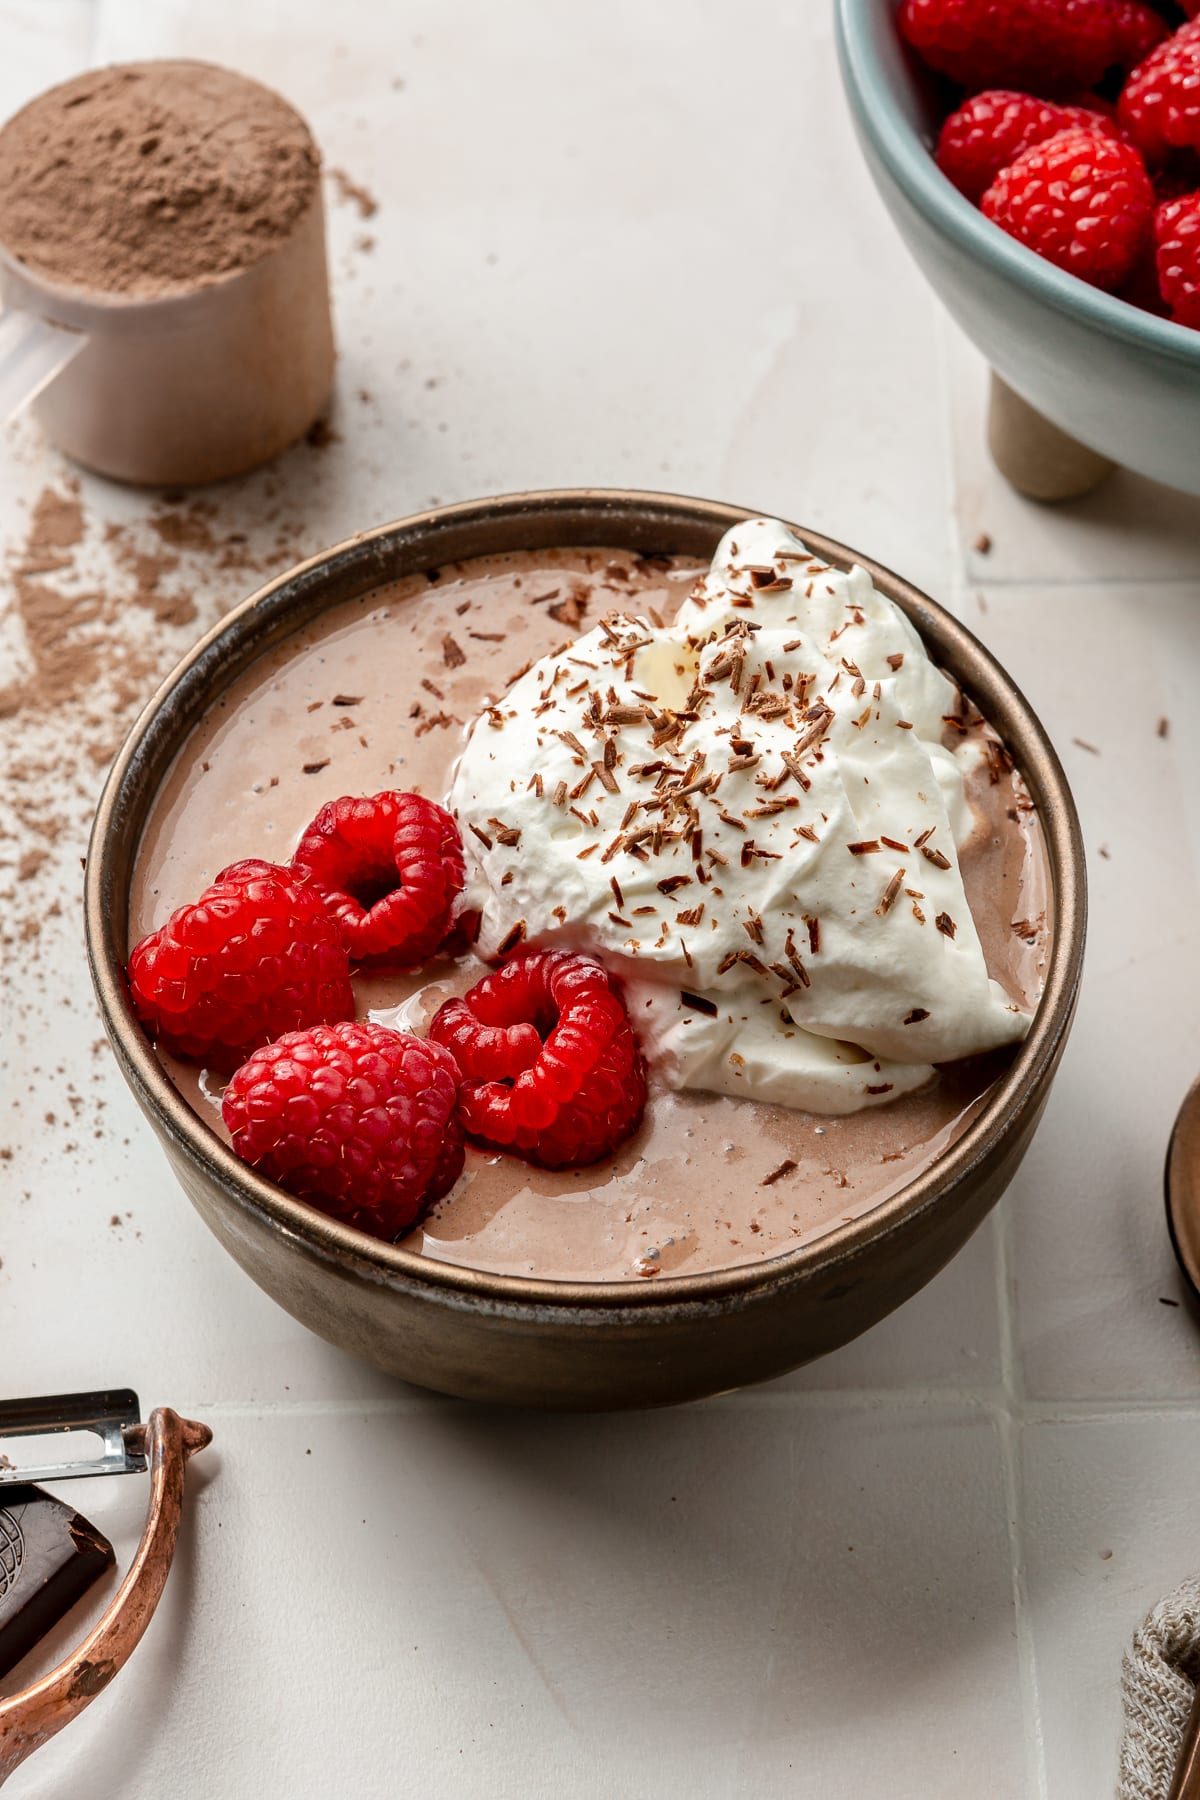 A bowl of chocolate protein pudding sits on a white tiled countertop. It has been topped with raspberries, whipped cream, and chocolate shavings. The remaining raspberries sit in a blue bowl off to the side.